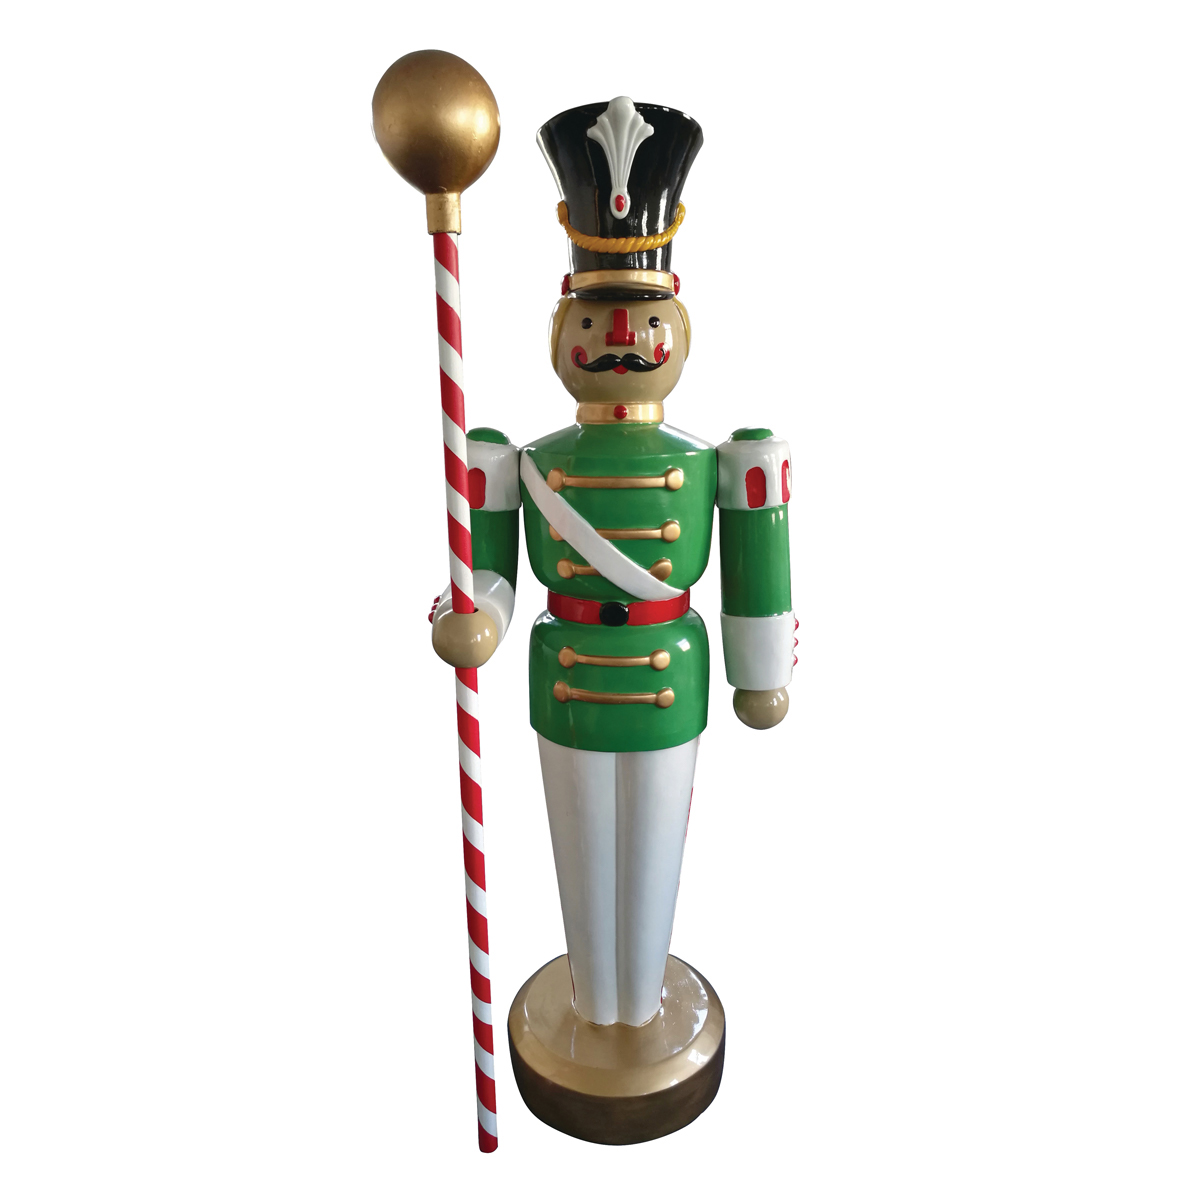 Toy Soldier - Green and White - w/ Drum Major’s Mace